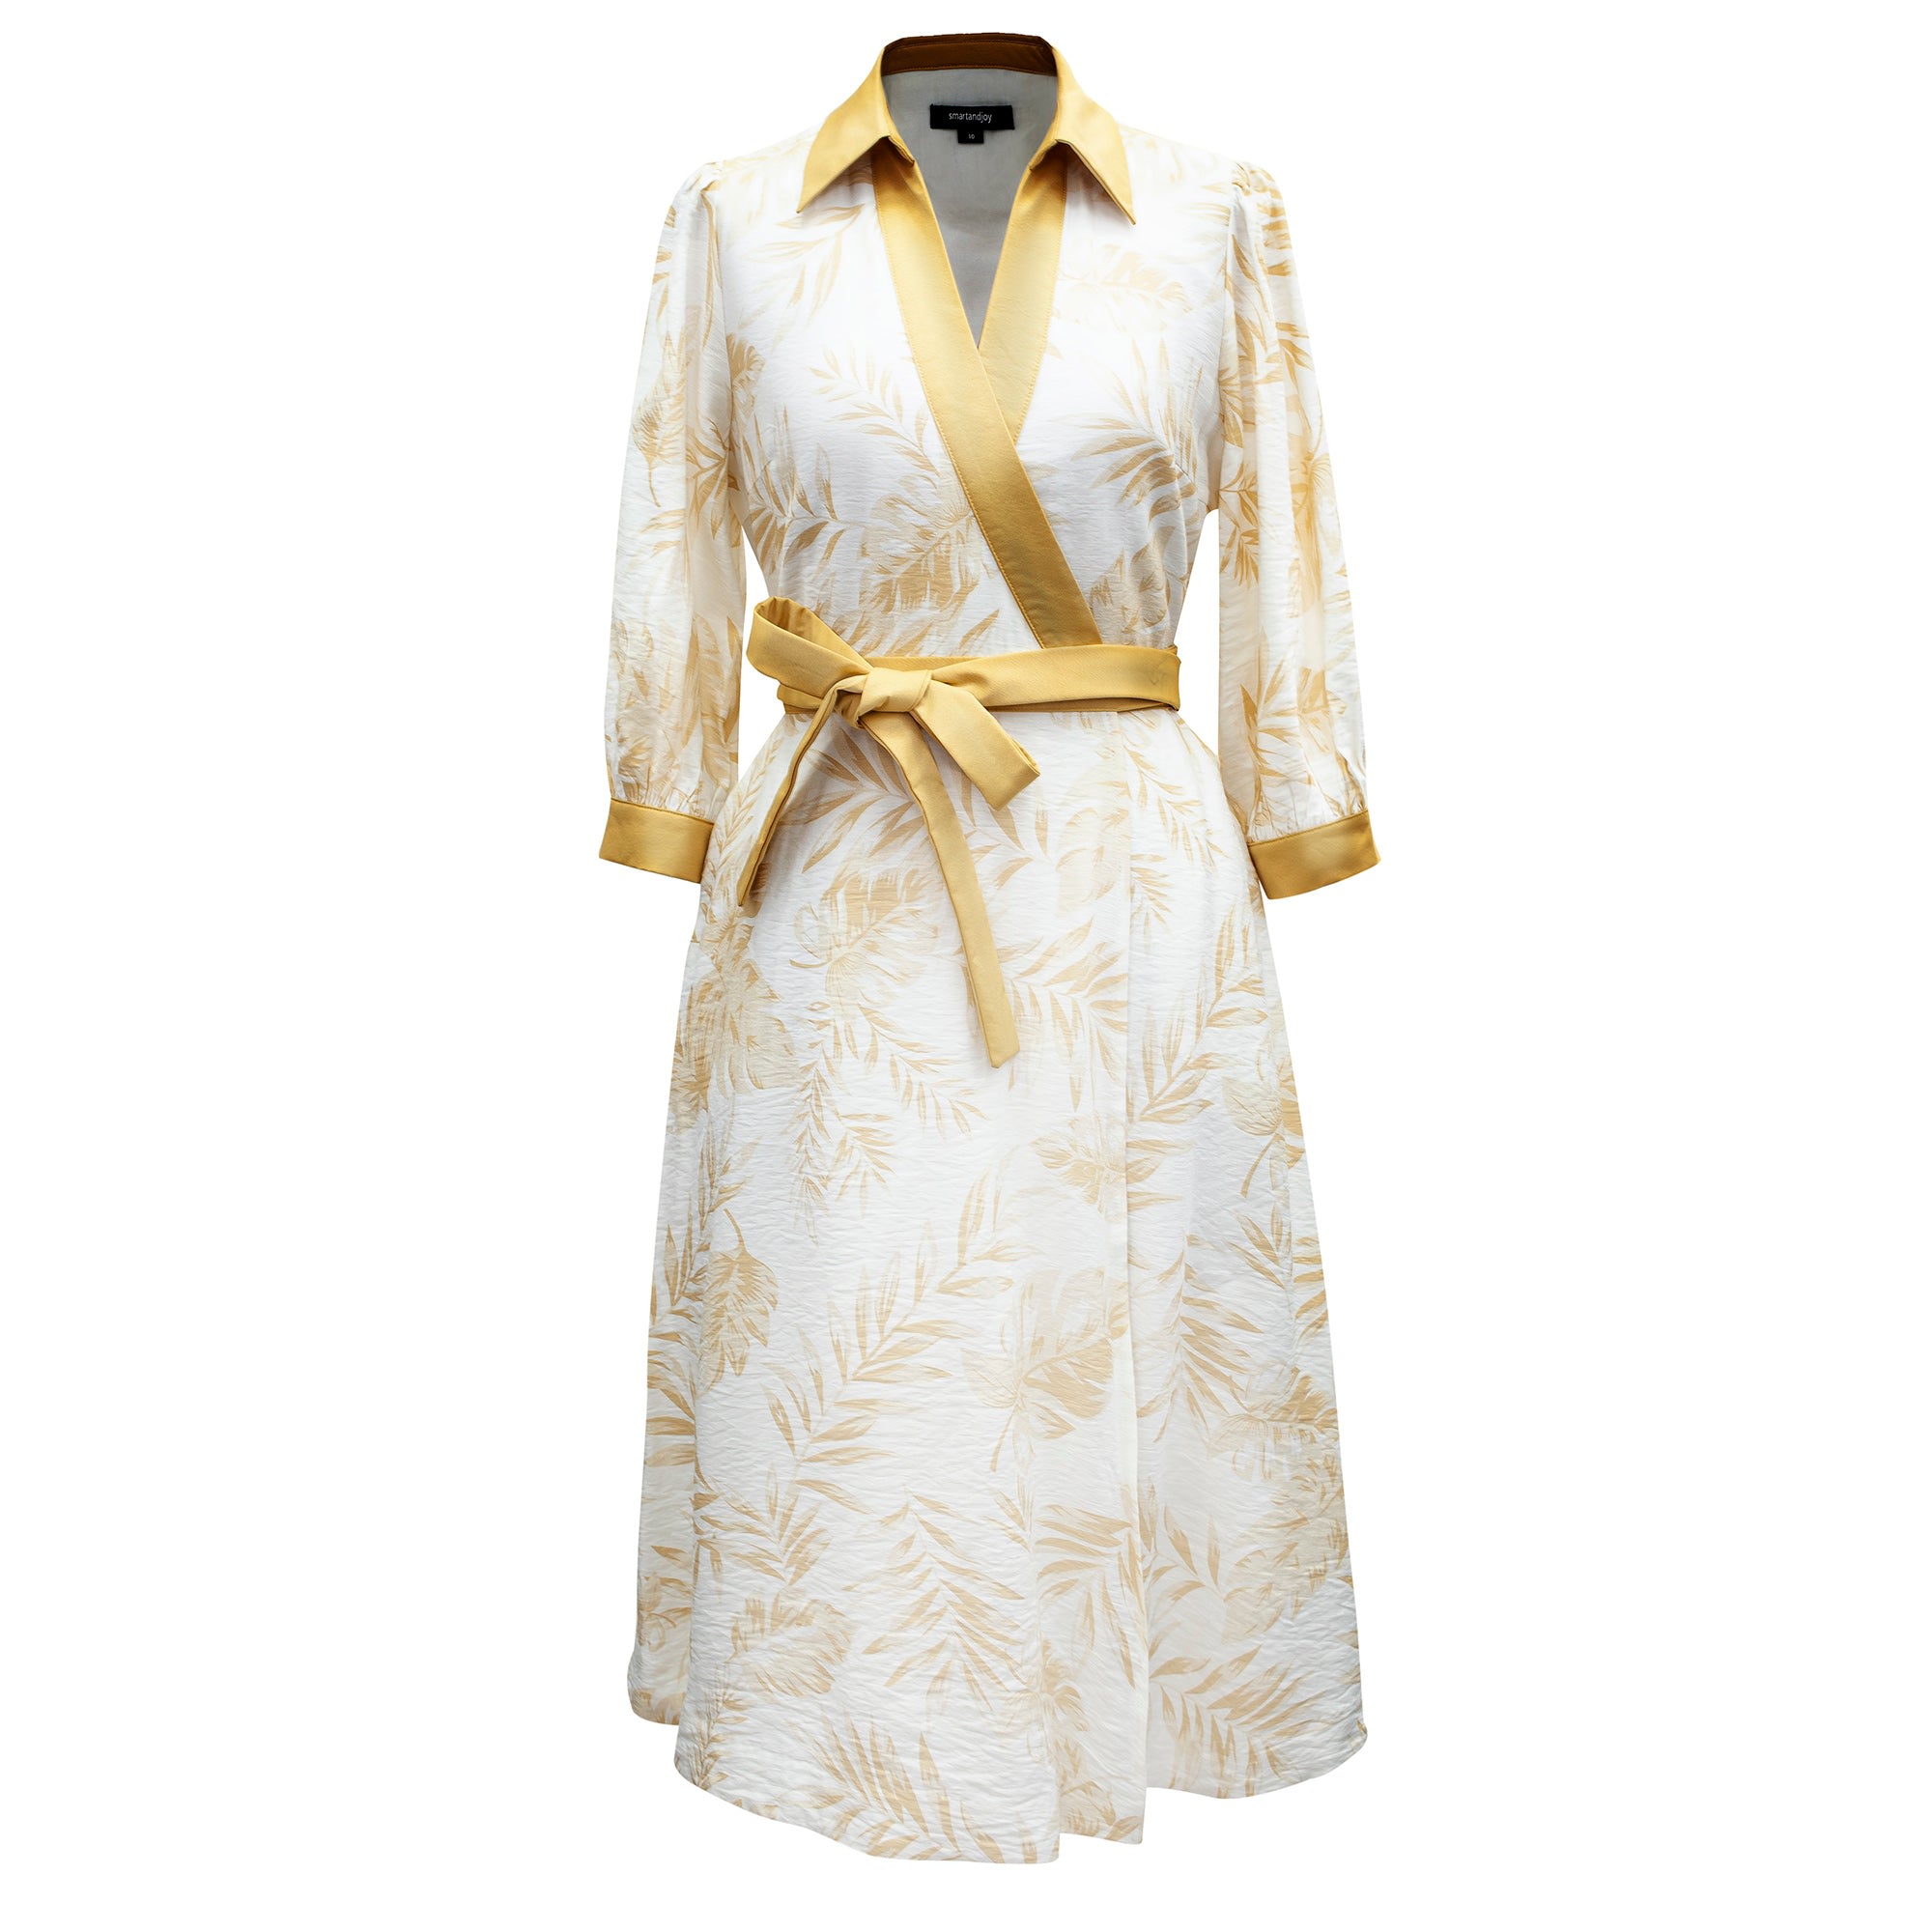 Women’s Bi-Material Wrap Dress With Tropical Print - Gold Small Smart and Joy